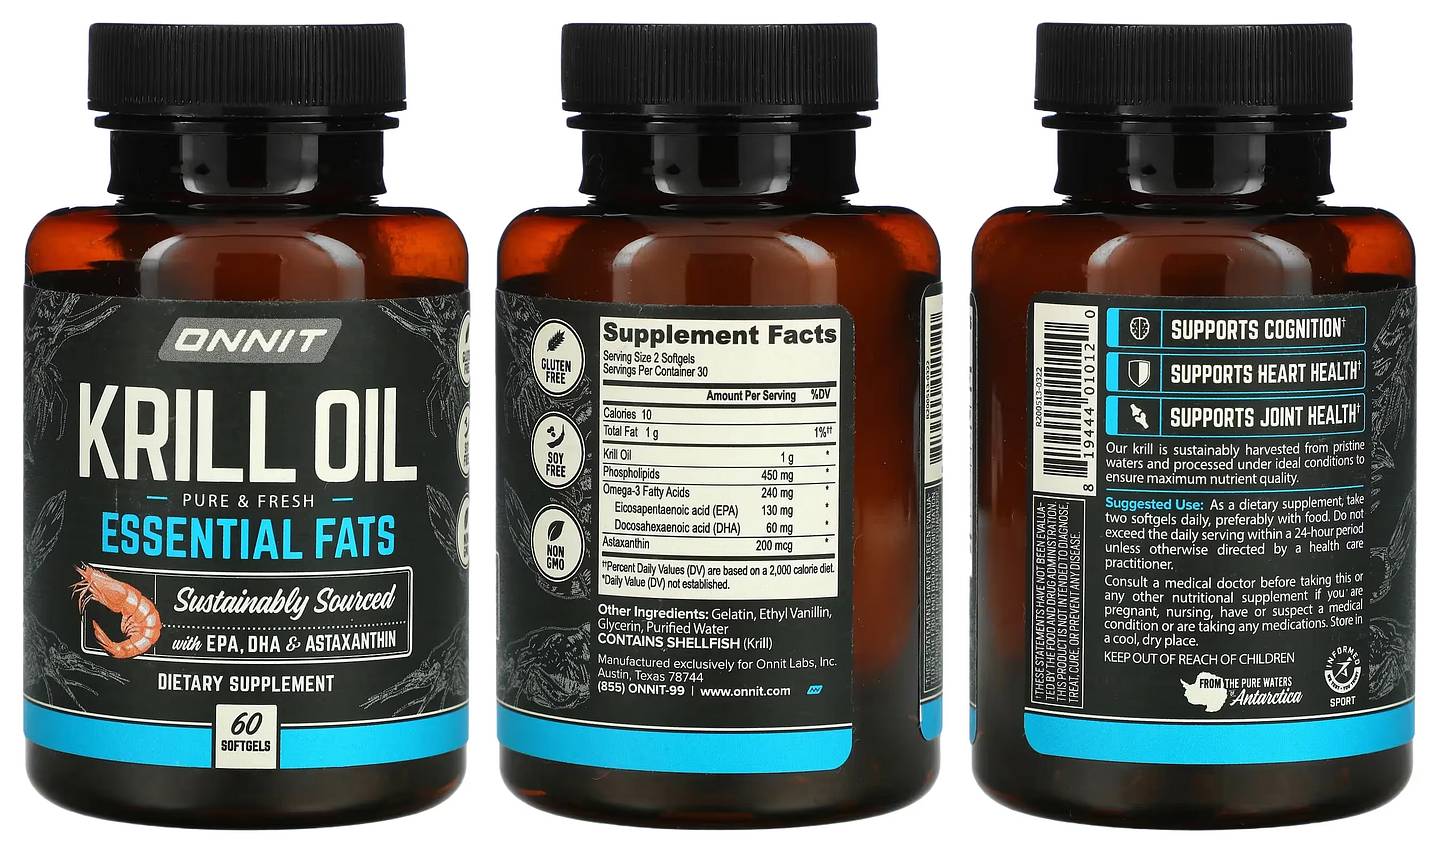 Onnit, Krill Oil, Essential Fats packaging